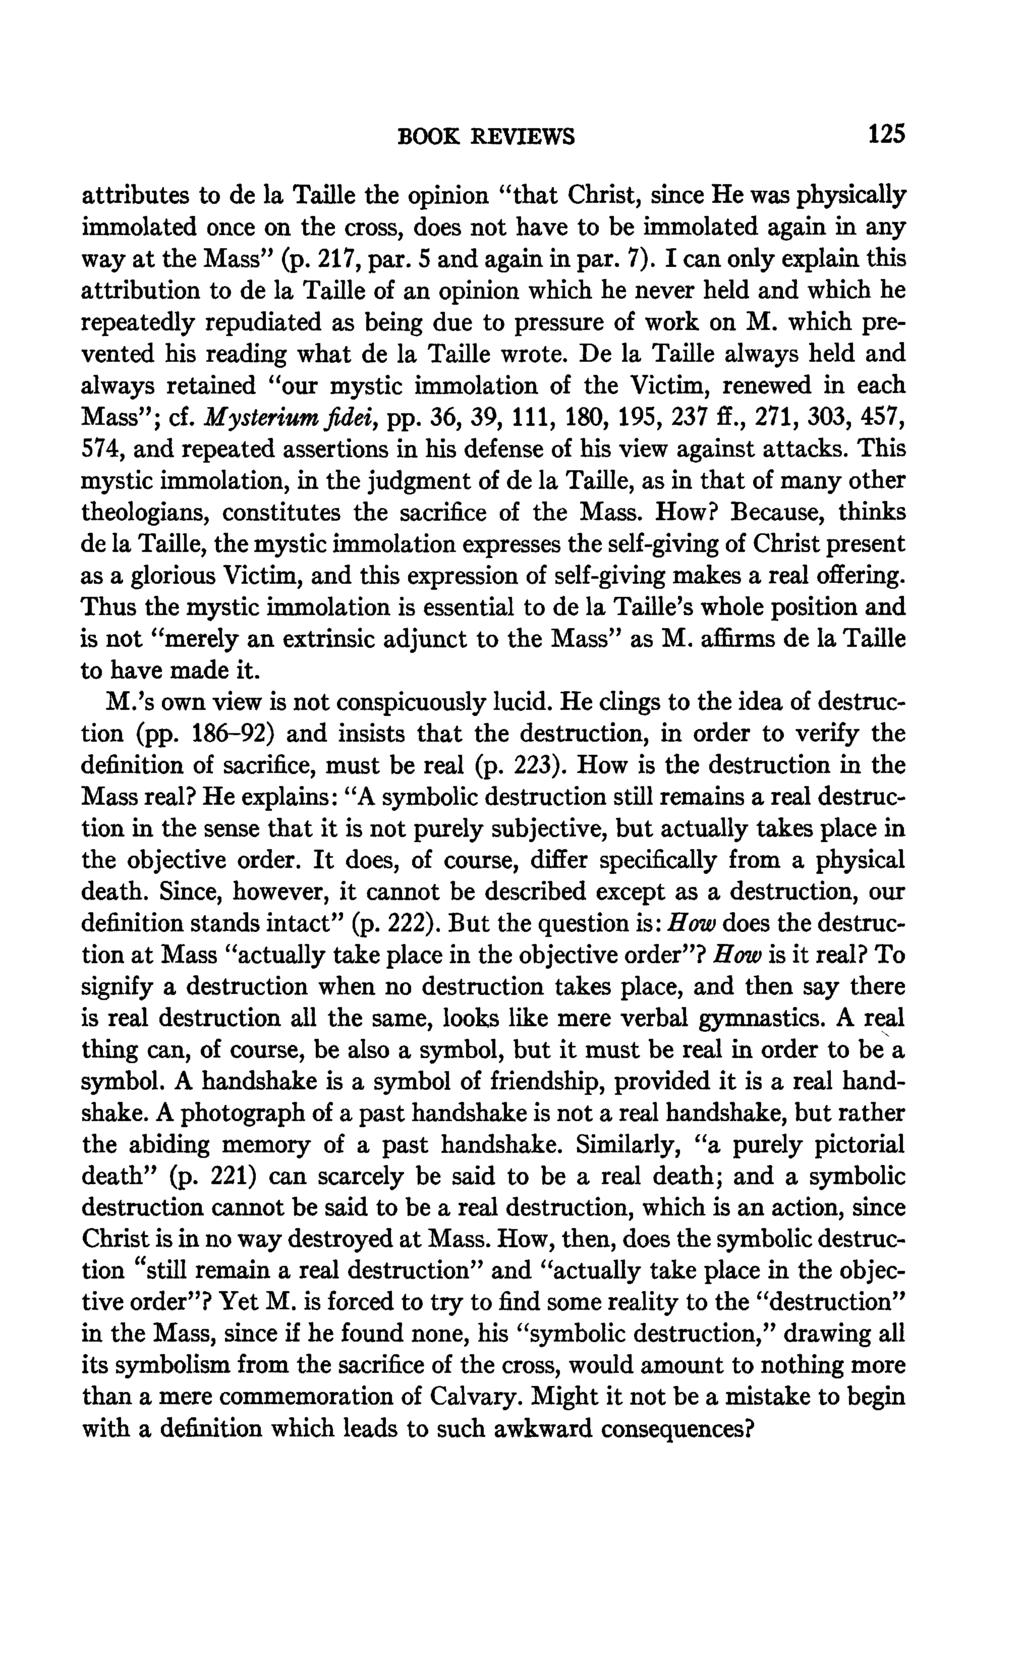 BOOK REVIEWS 125 attributes to de la Taille the opinion "that Christ, since He was physically immolated once on the cross, does not have to be immolated again in any way at the Mass" (p. 217, par.